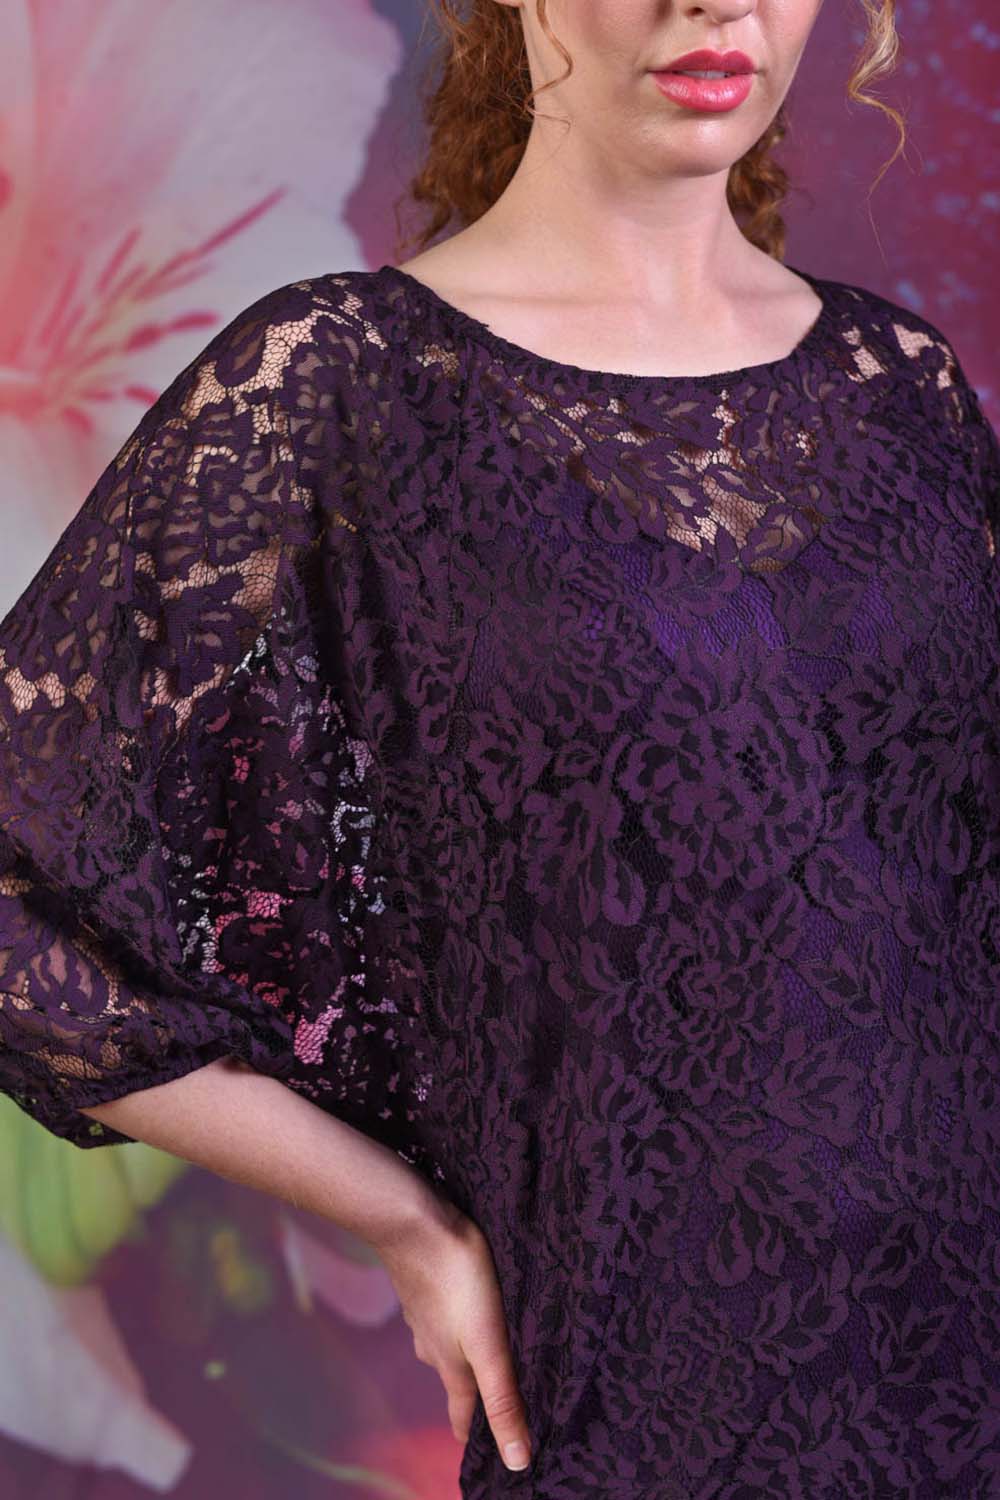 Close-up of the purple lace material of the Blair Lace Dress